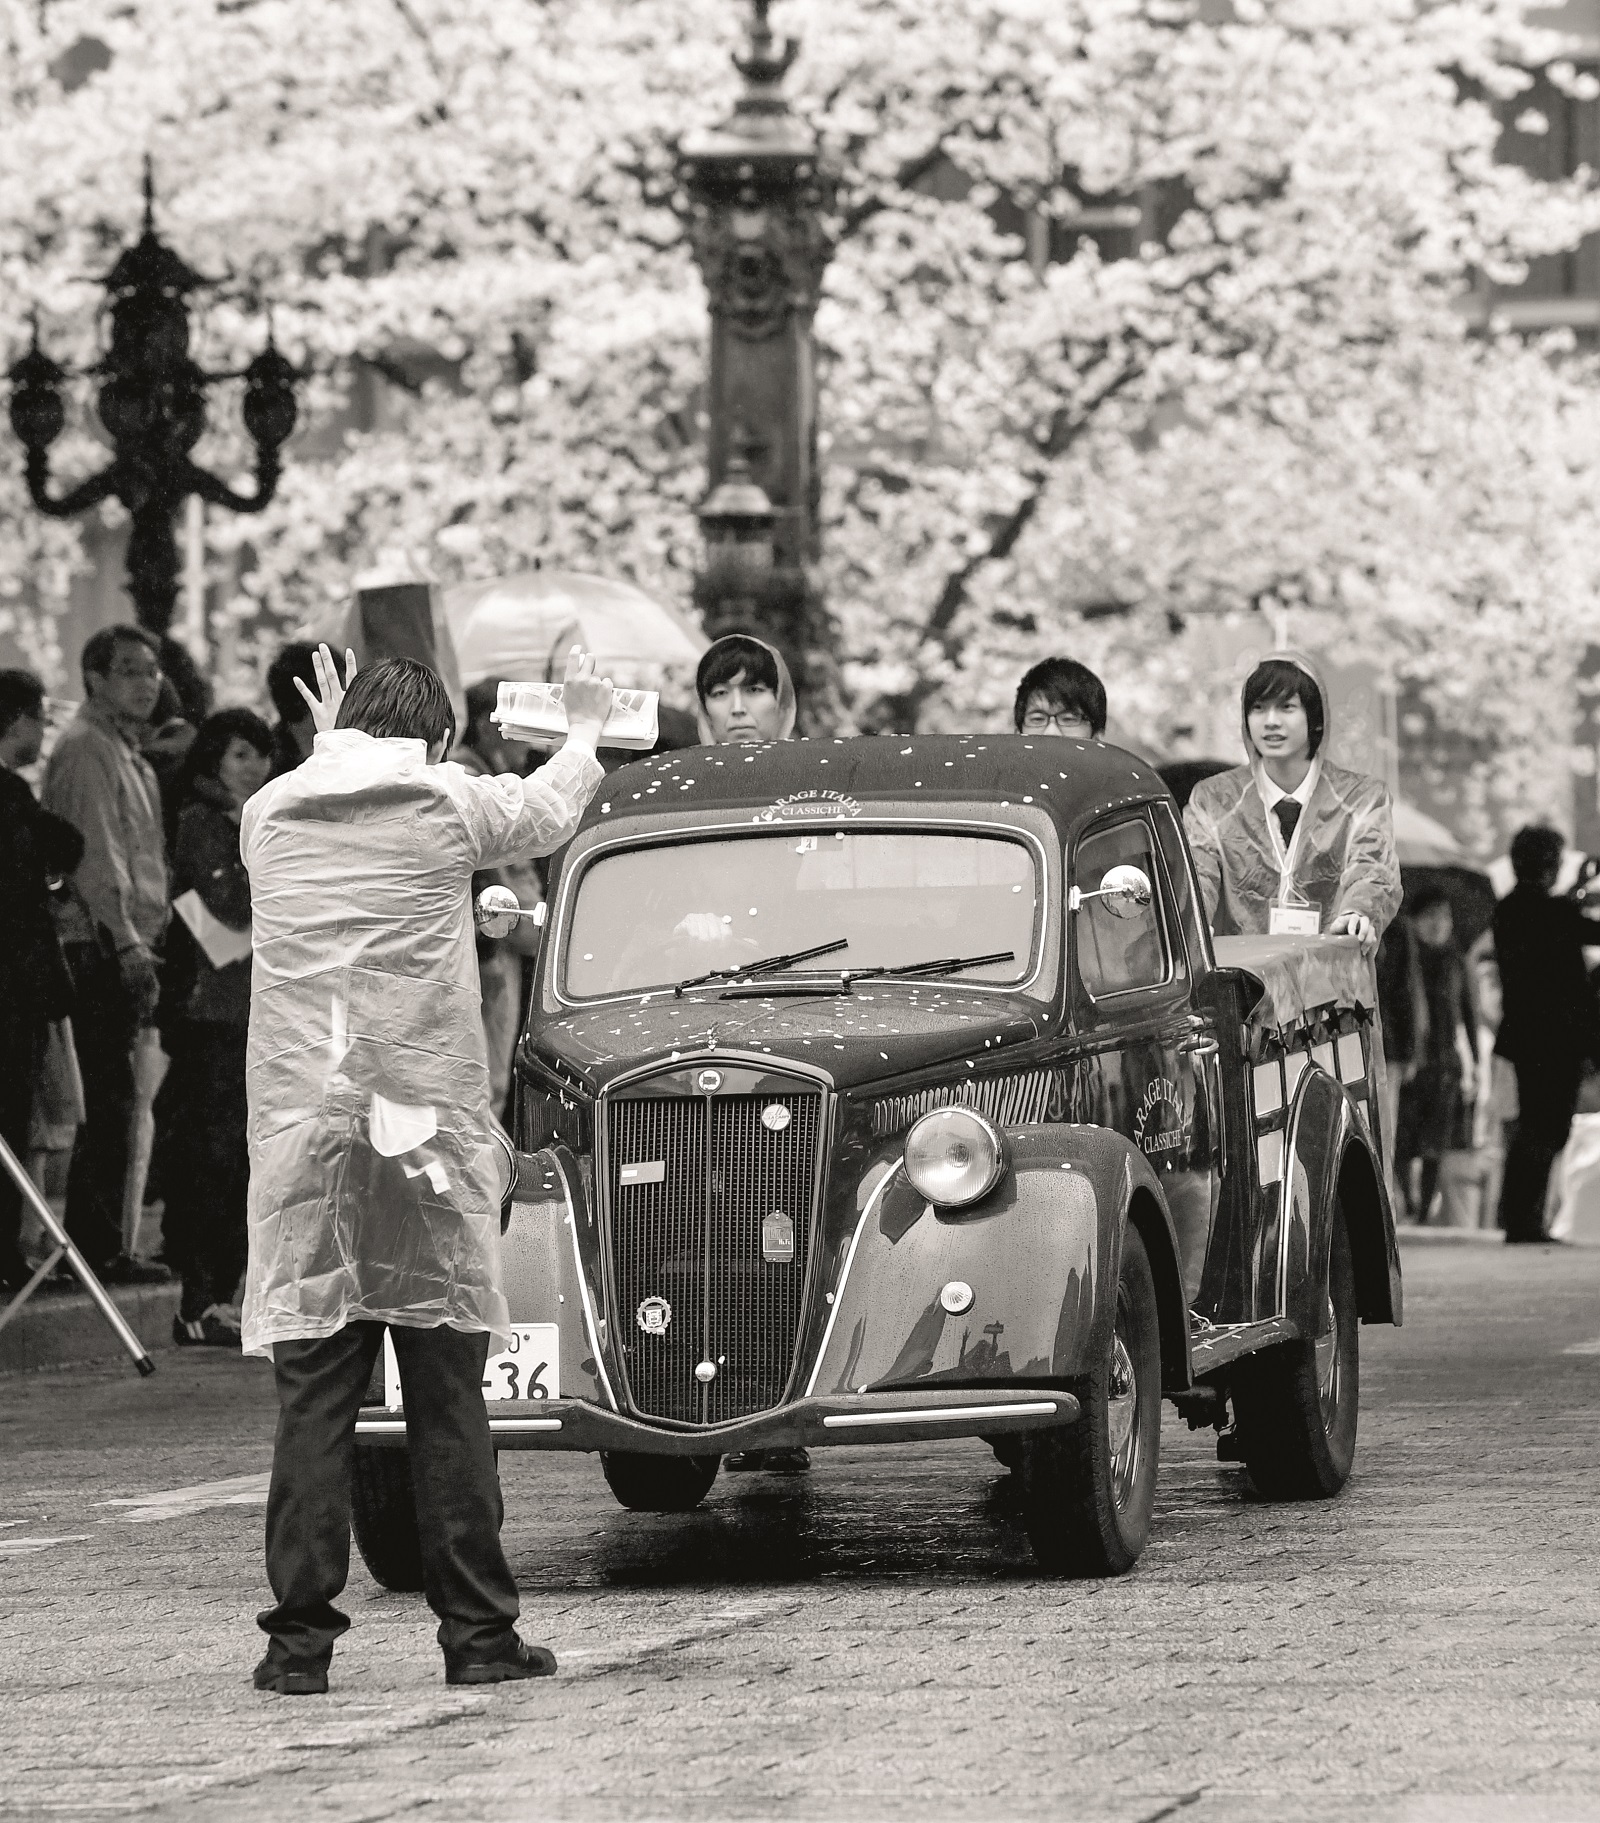 1948 Lancia Ardea Camioncino is on display during the Japan Classic Automobile 2017 event on the bridge of Nihonbashi in Tokyo on April 9, 2017. About 20 classic cars from 1924 and 1981 were participated in the event., Image: 328408115, License: Rights-managed, Restrictions: , Model Release: no, Credit line: Toshifumi KITAMURA / AFP / Profimedia